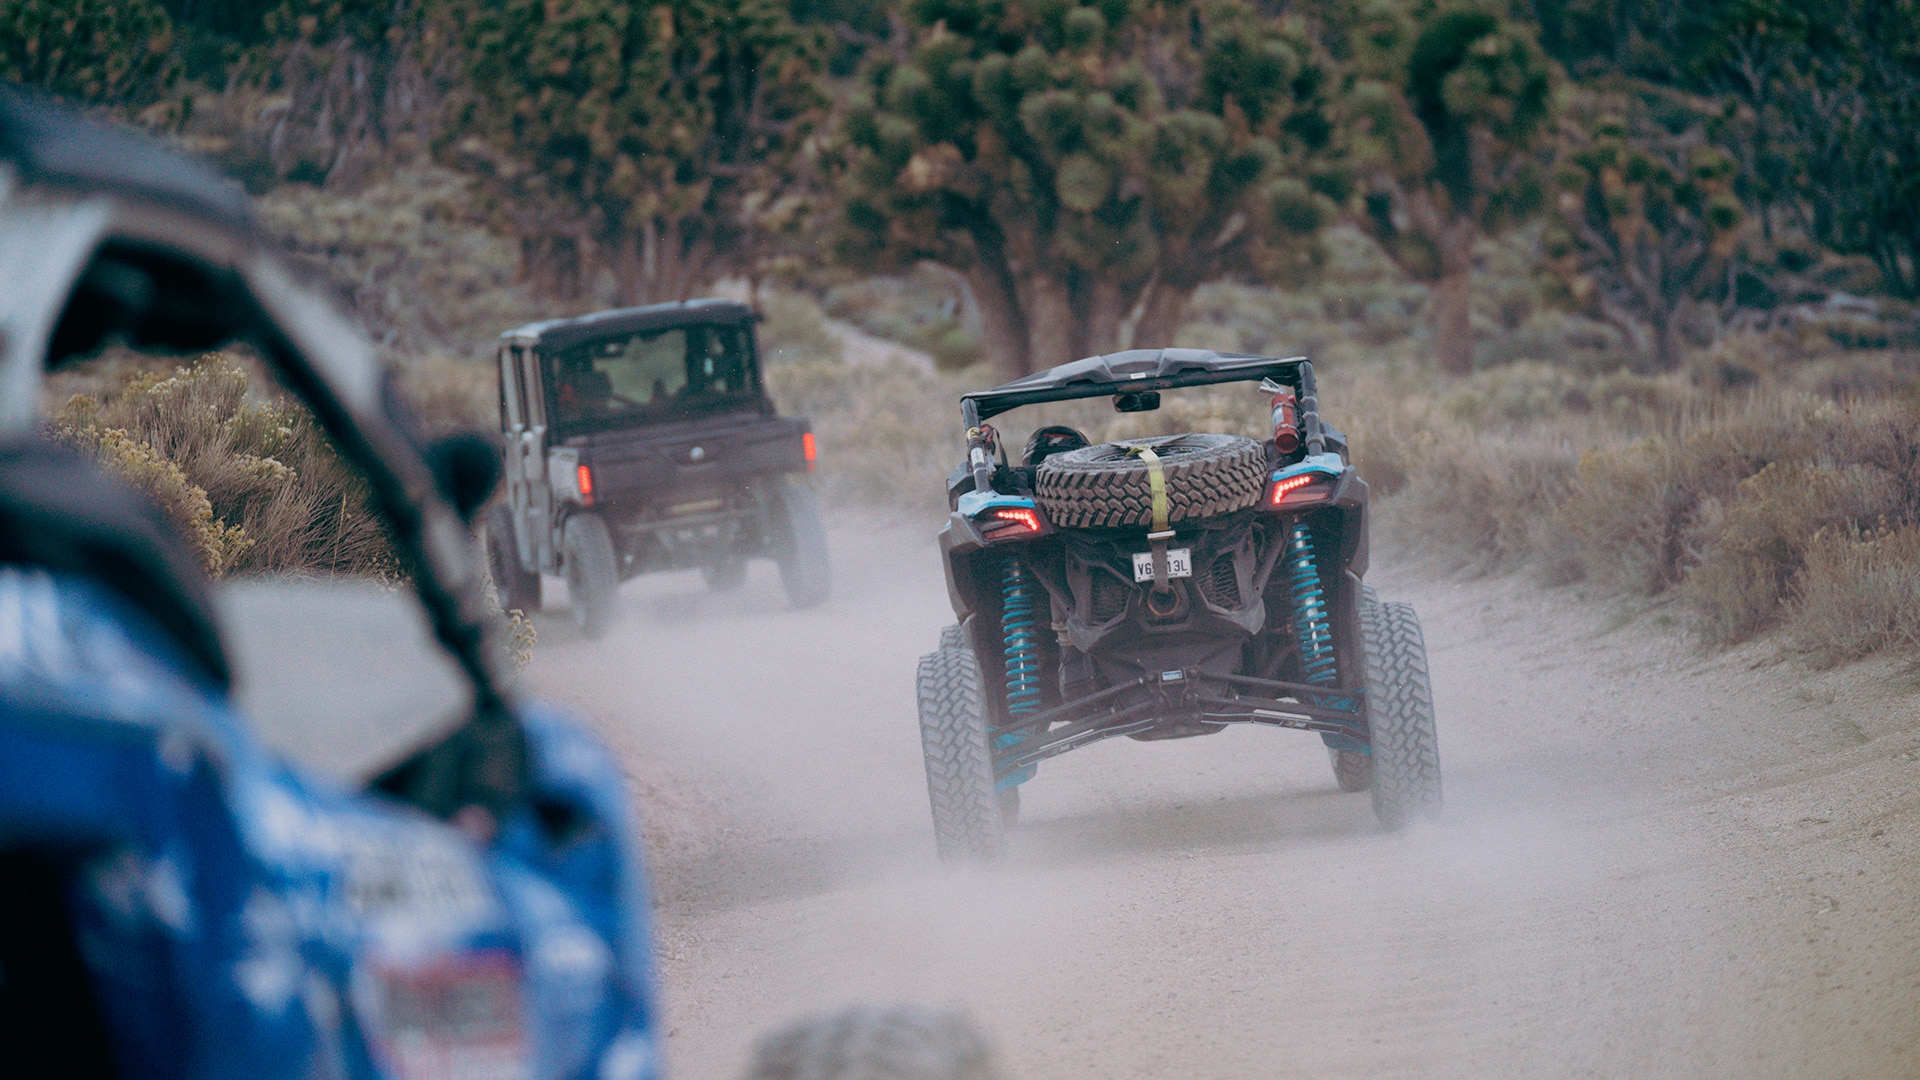 Riders driving Can-Am side-by-sides on a trail of dirt and kicking up clouds of dust.